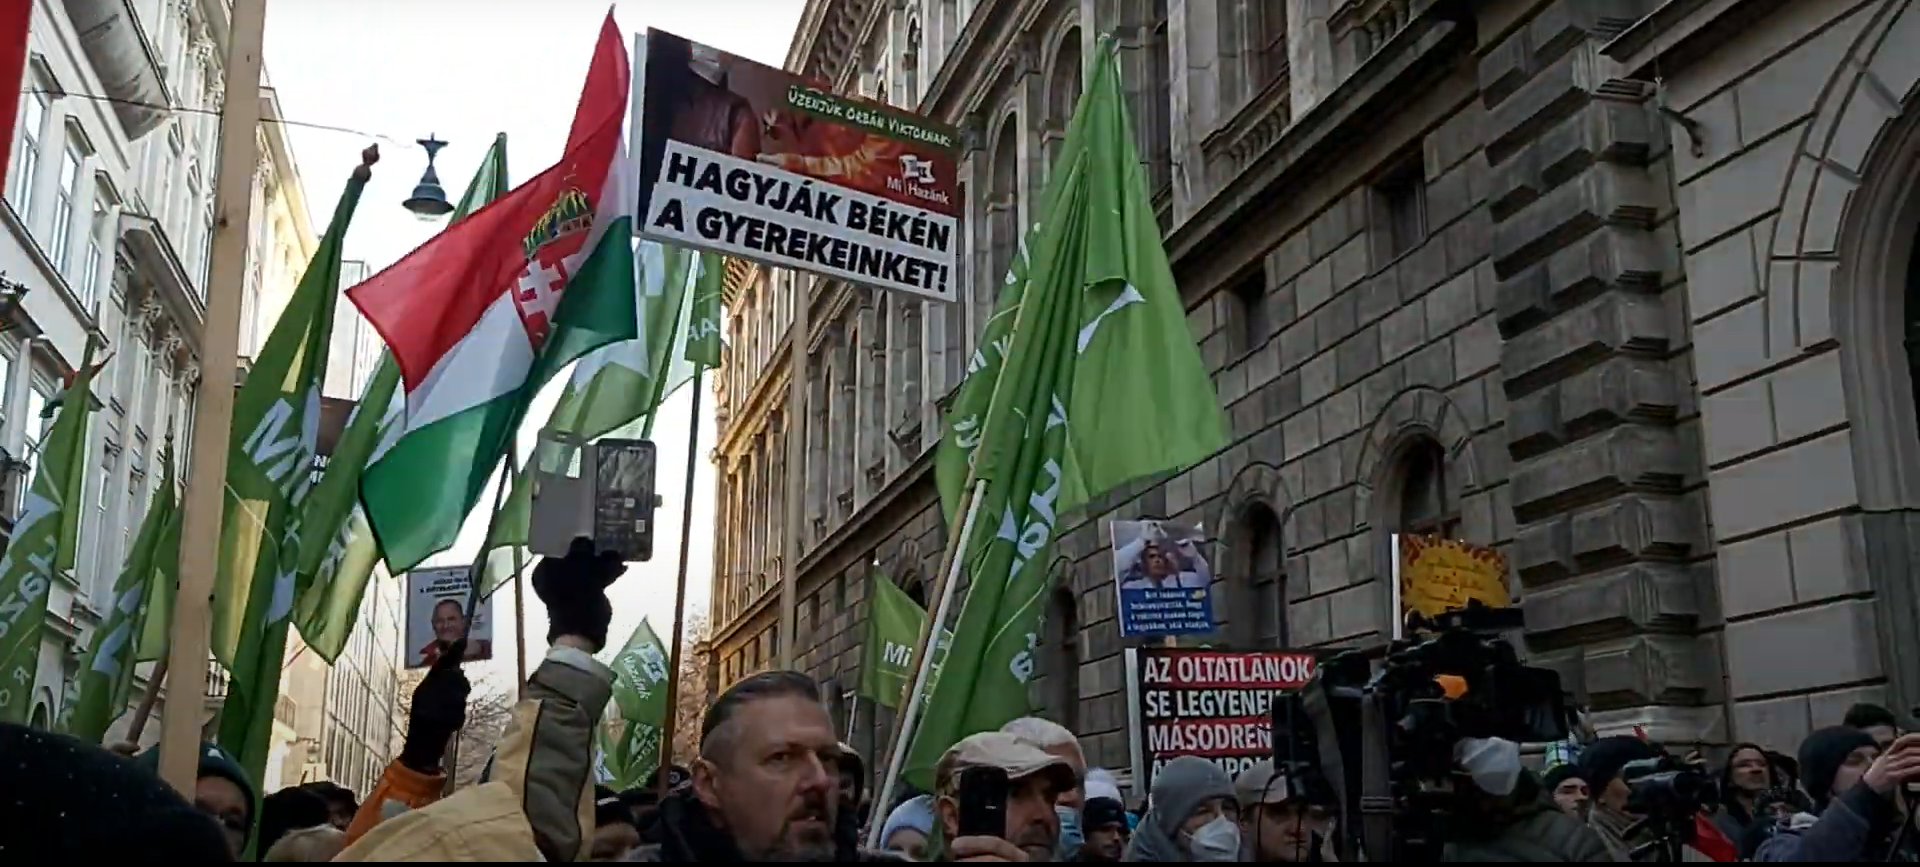 Far-right Mi Hazánk Party Holds Demonstration against Hungary's 'COVID Dictatorship'